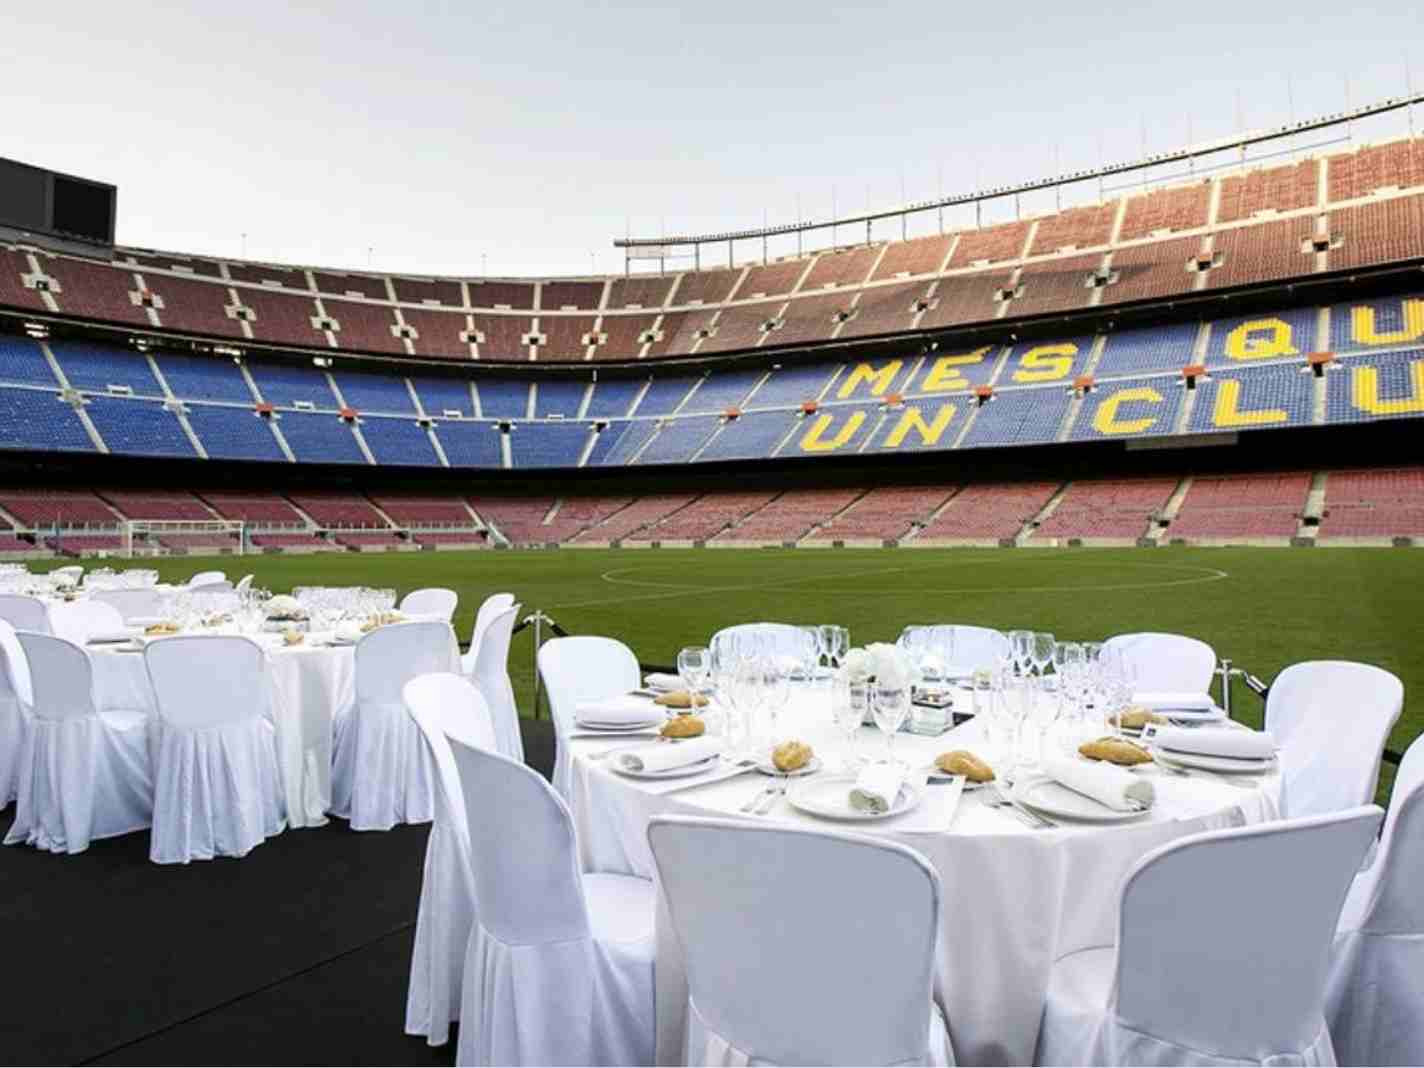 Camp Nou all set to host your marriage.